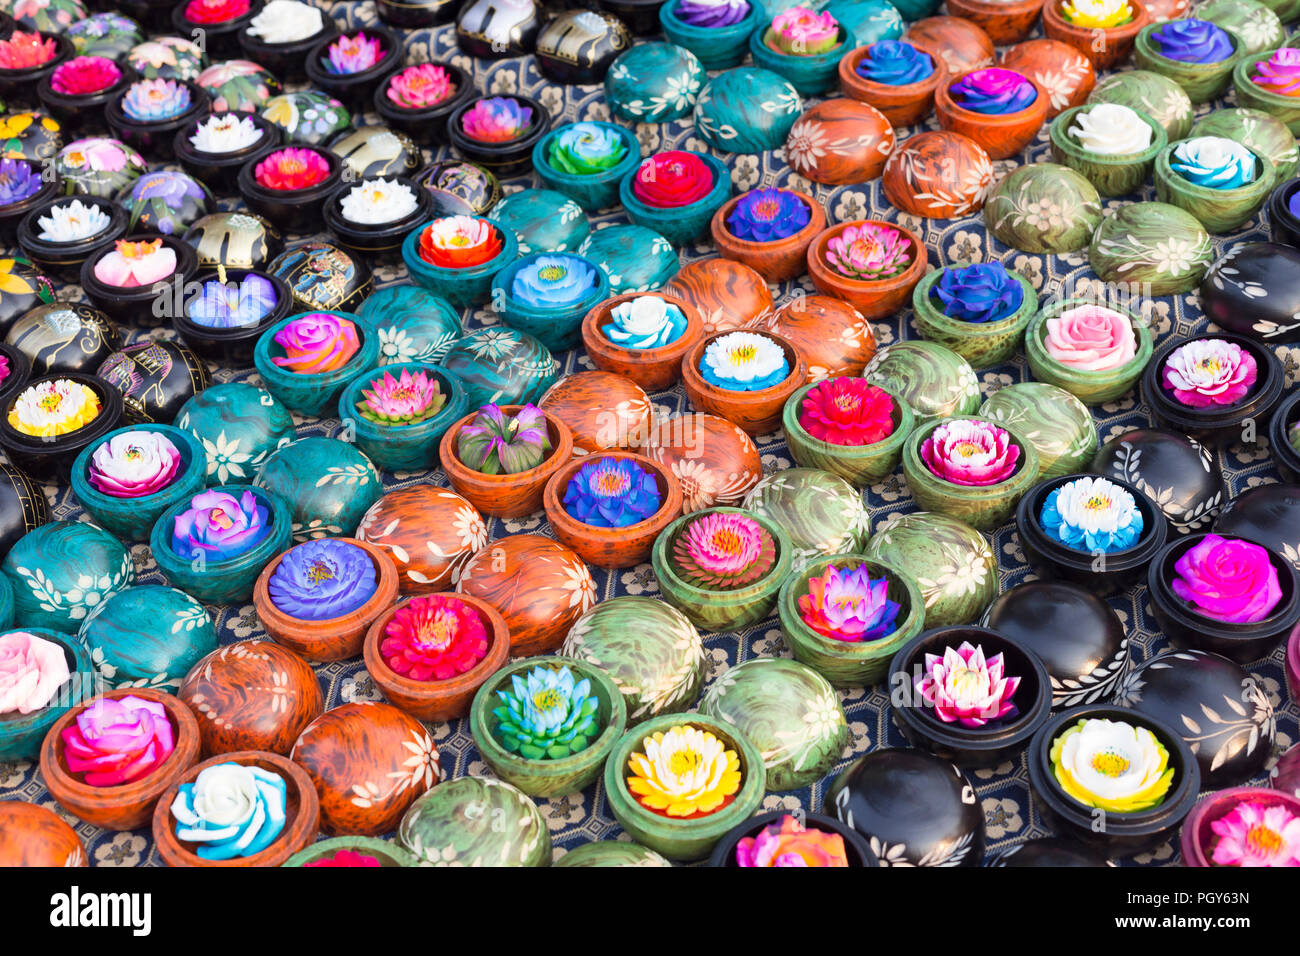 Carved soap with floral aroma on display at a market in Chiang May, Thailand Stock Photo